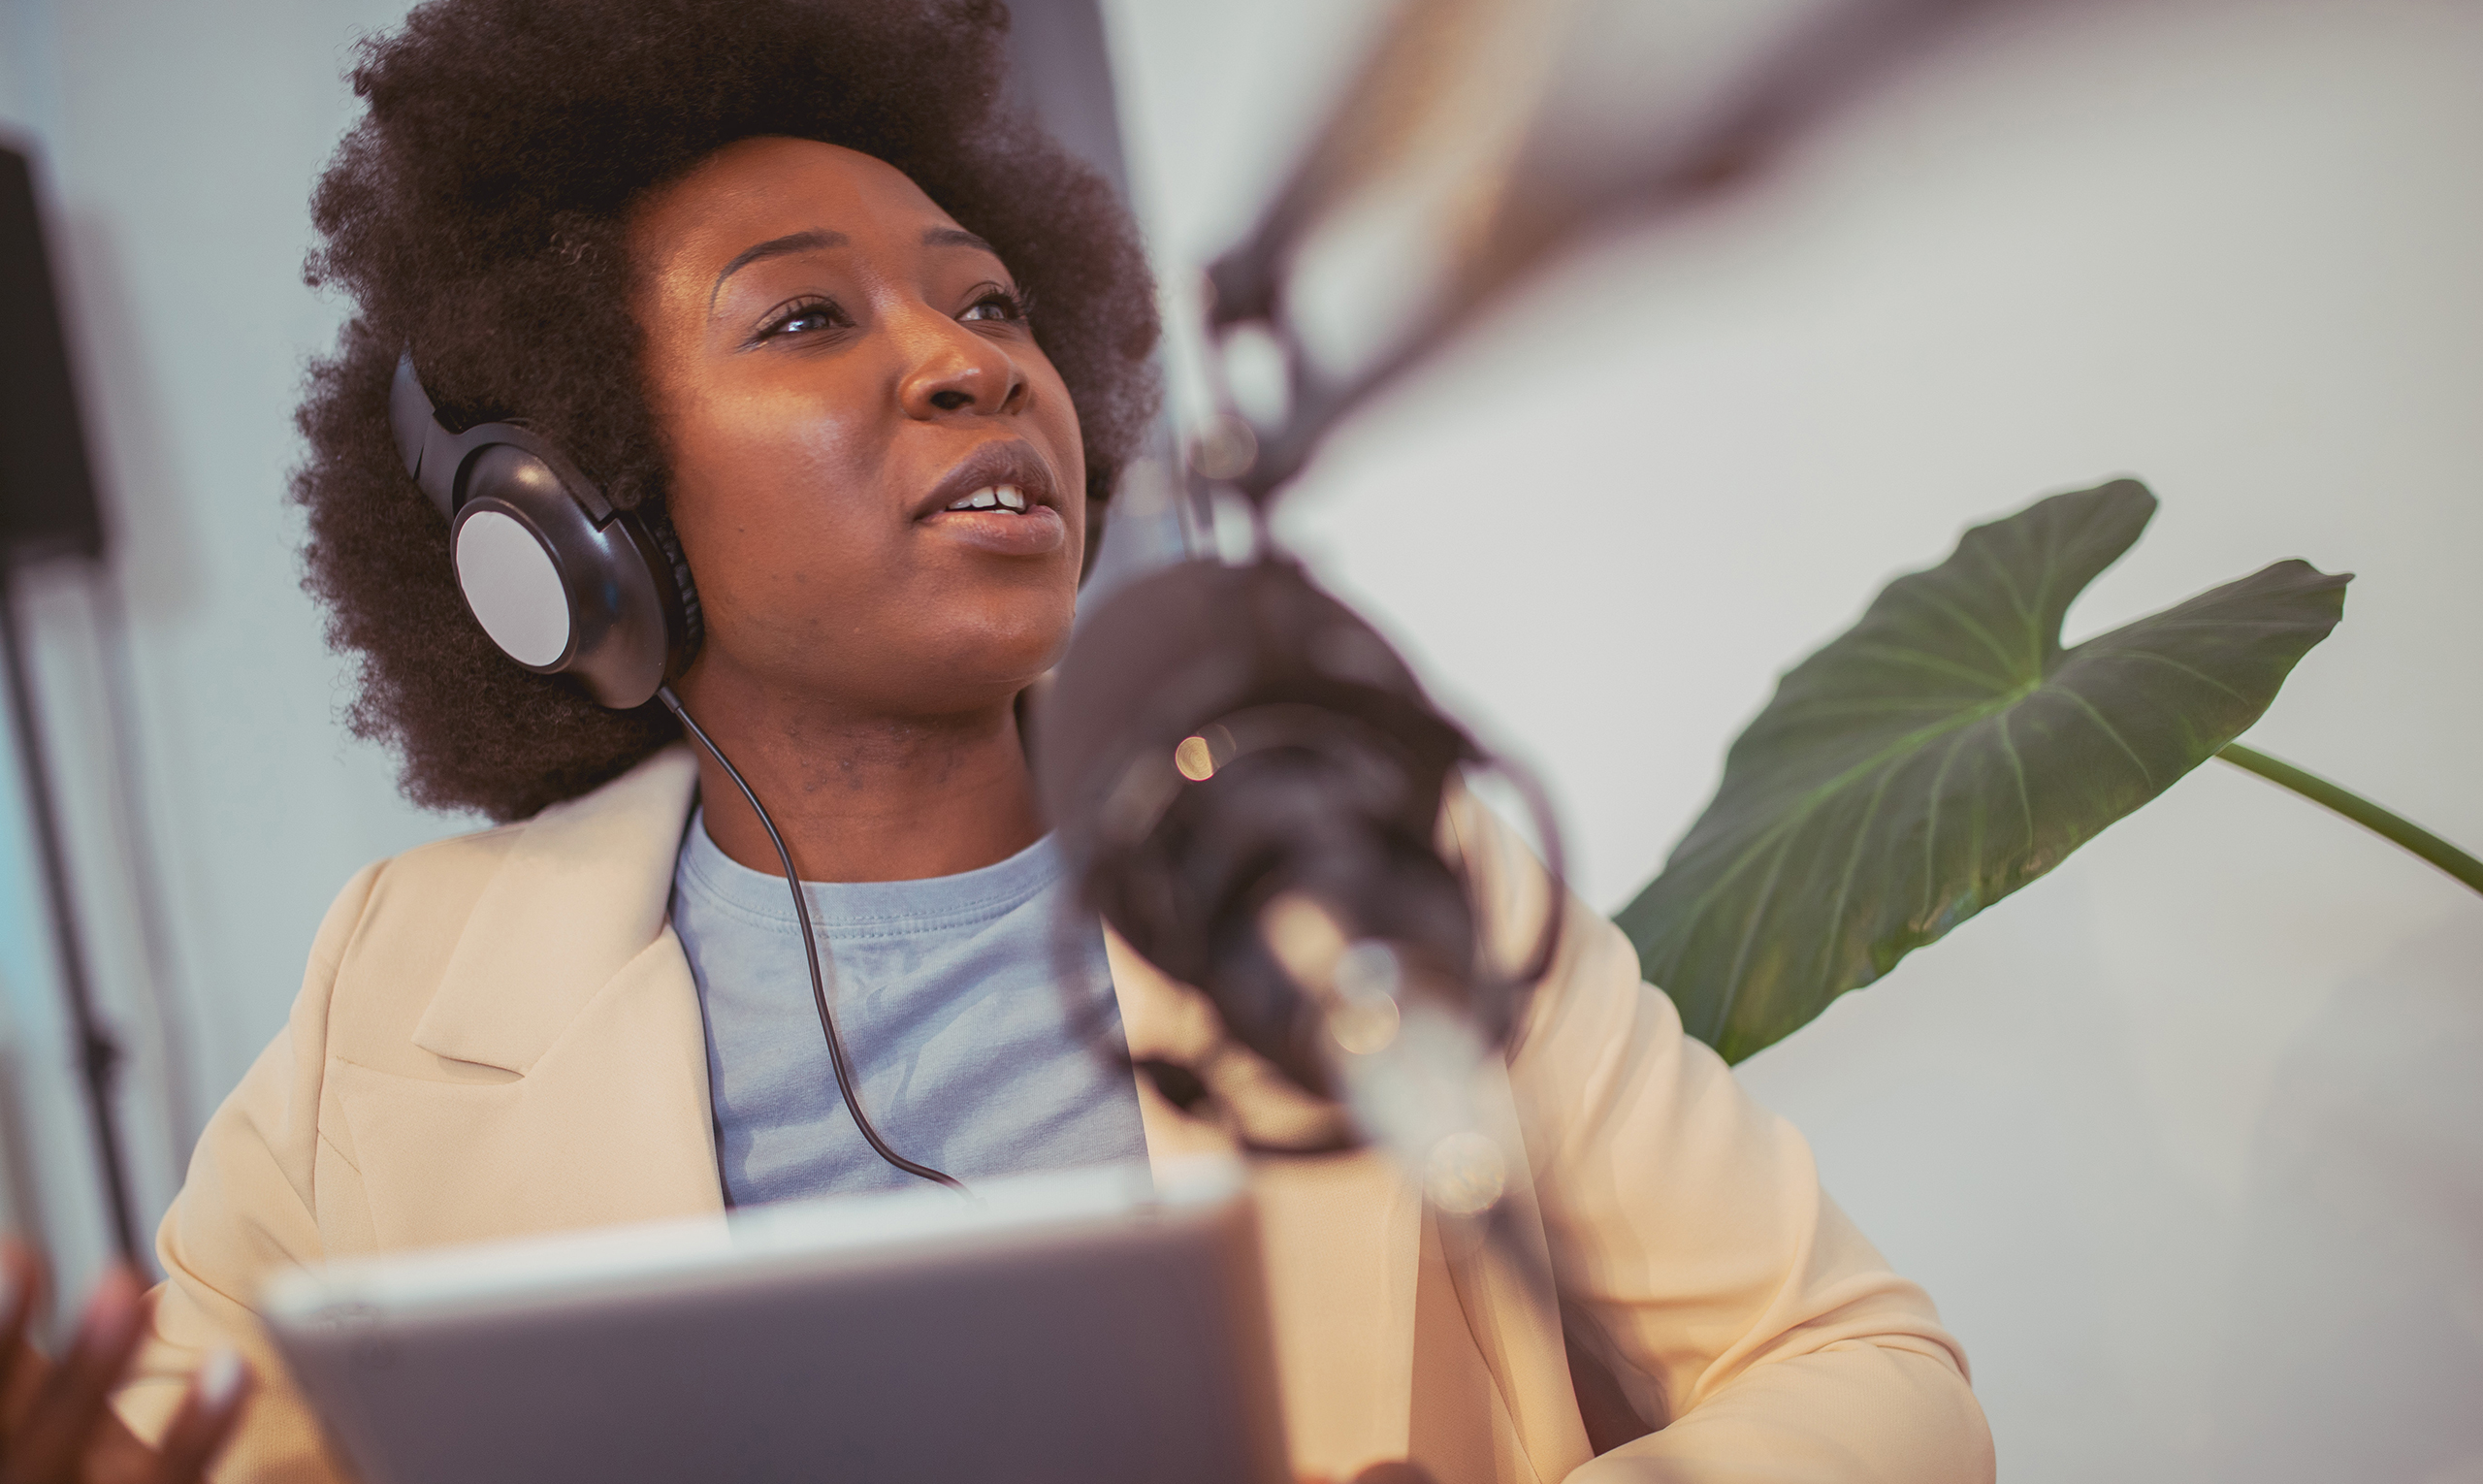 A Black woman with recording equipment speaks into a microphone